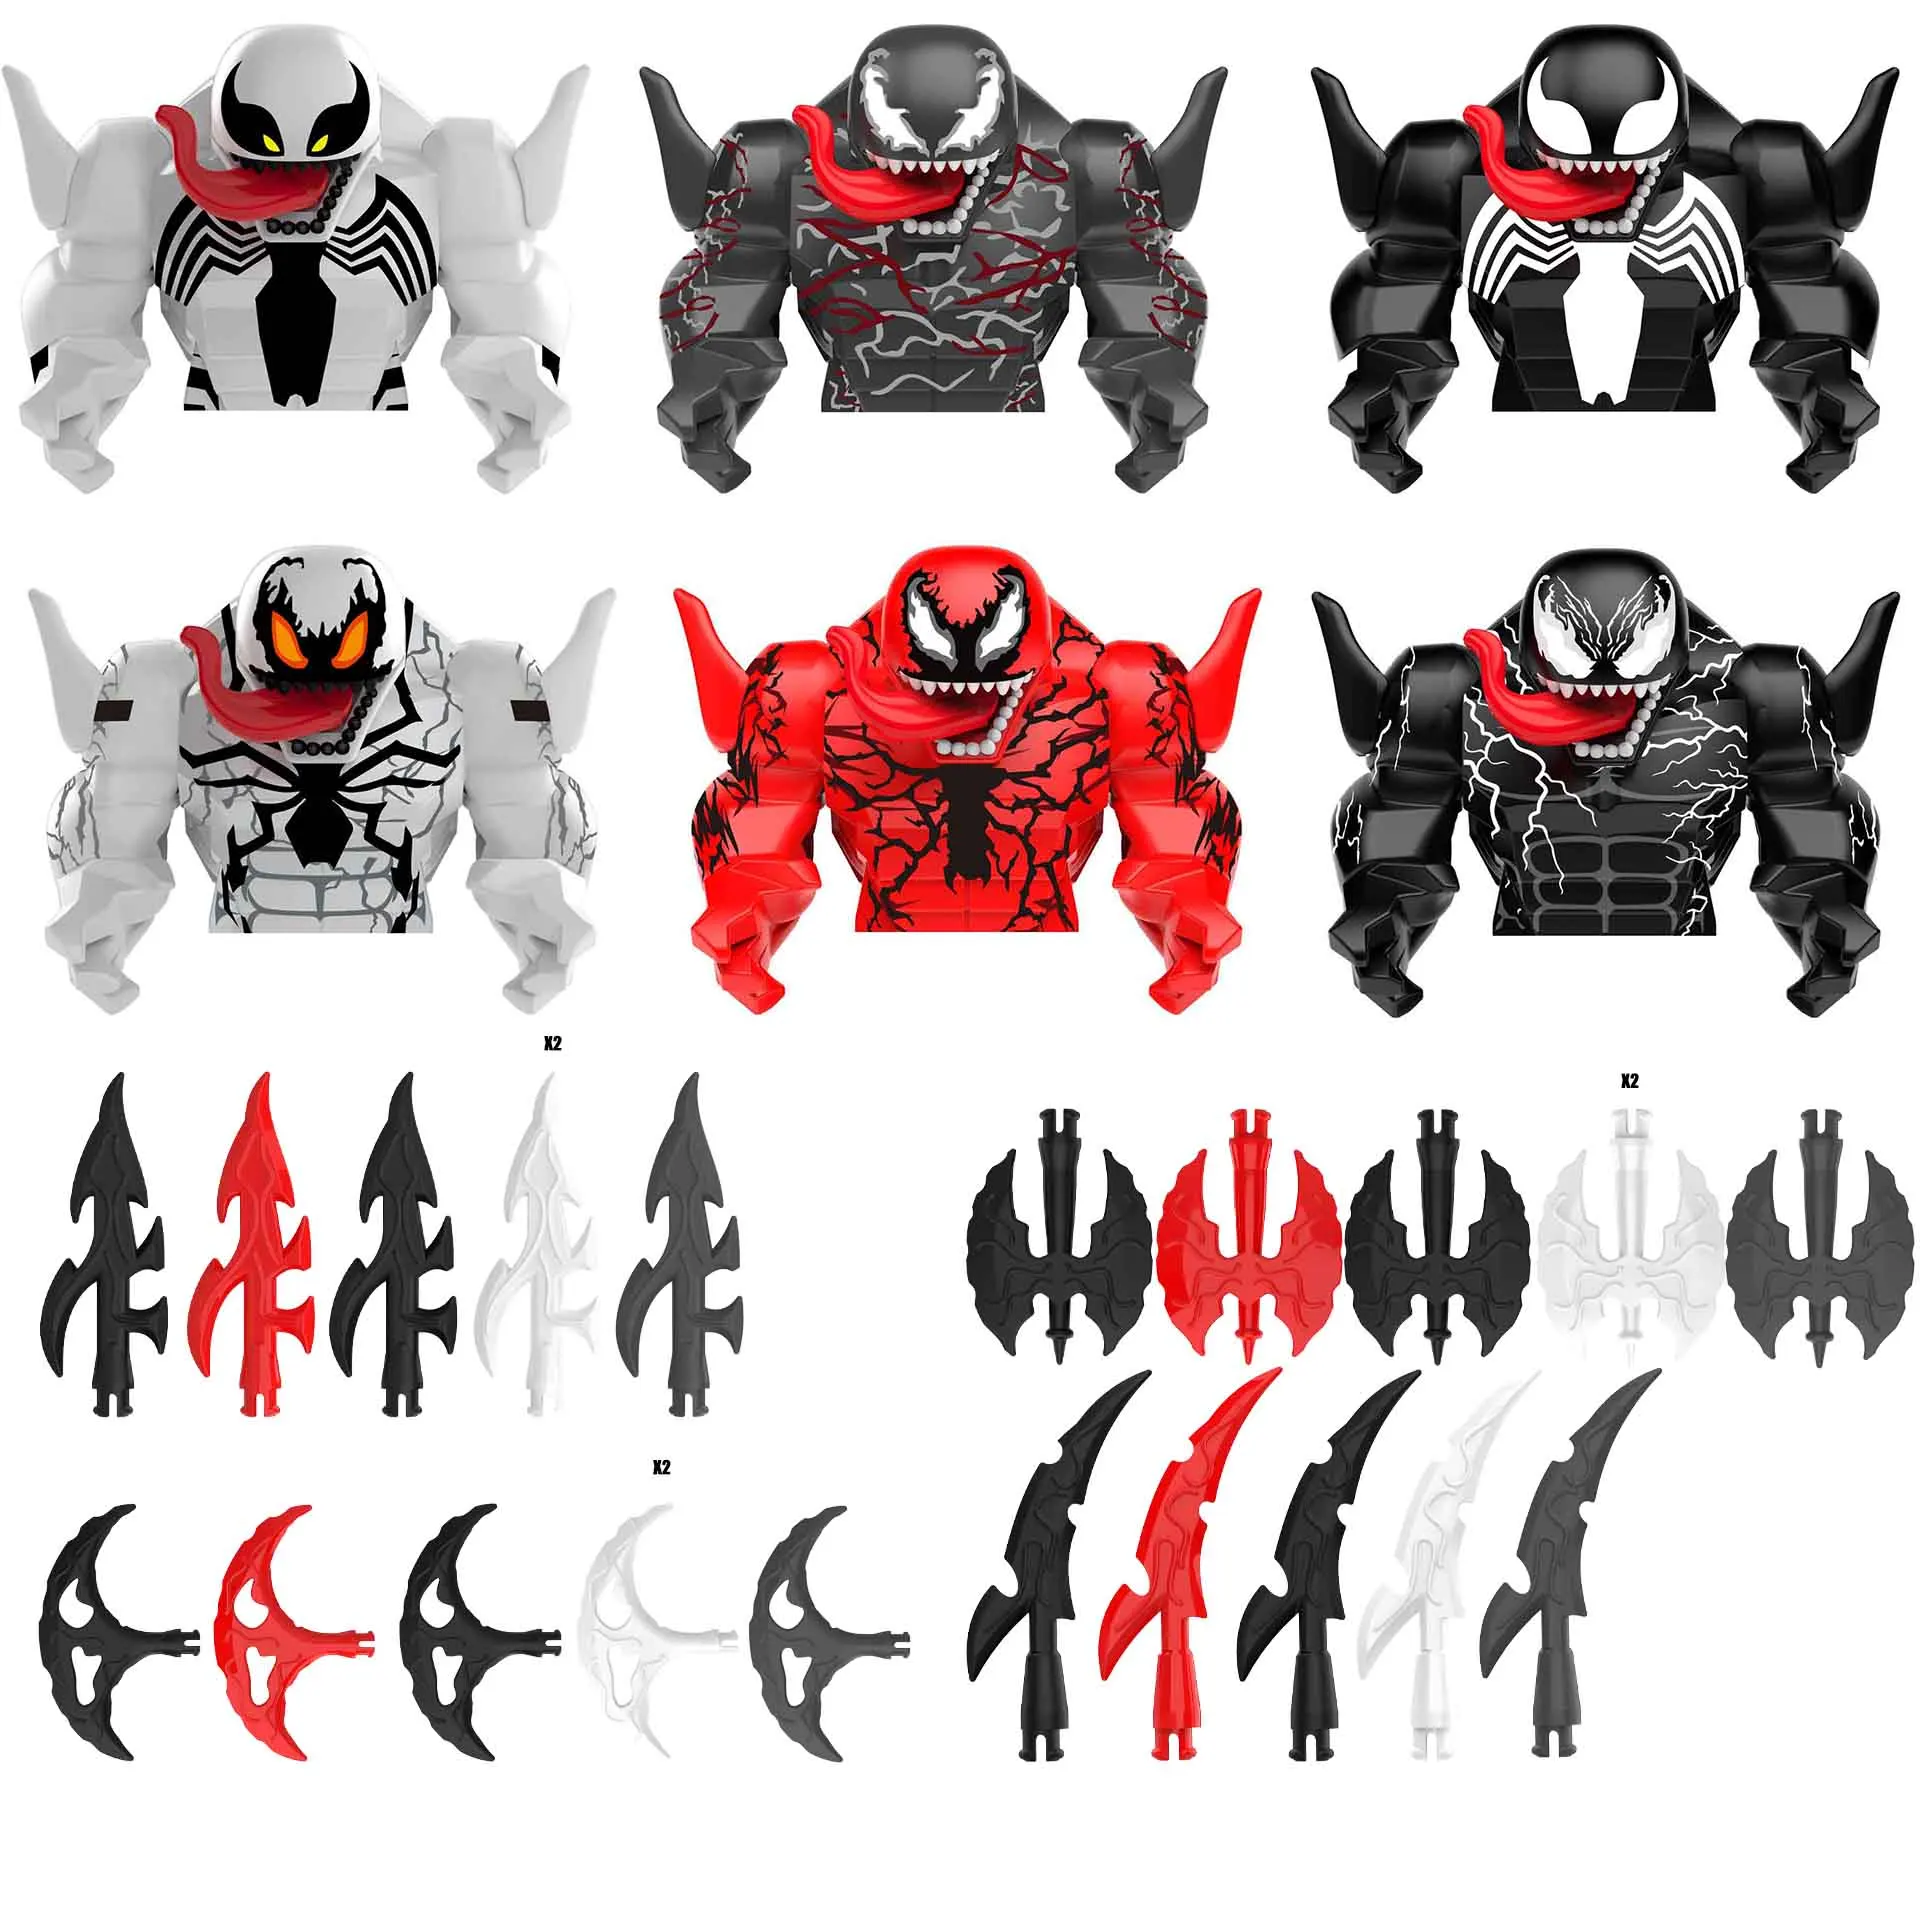 

AF321-326 Venom Carnage RIOT ANTI-Venom Superhero Series Character Image Children's Puzzle Assembly Block Toys 4 Weapons